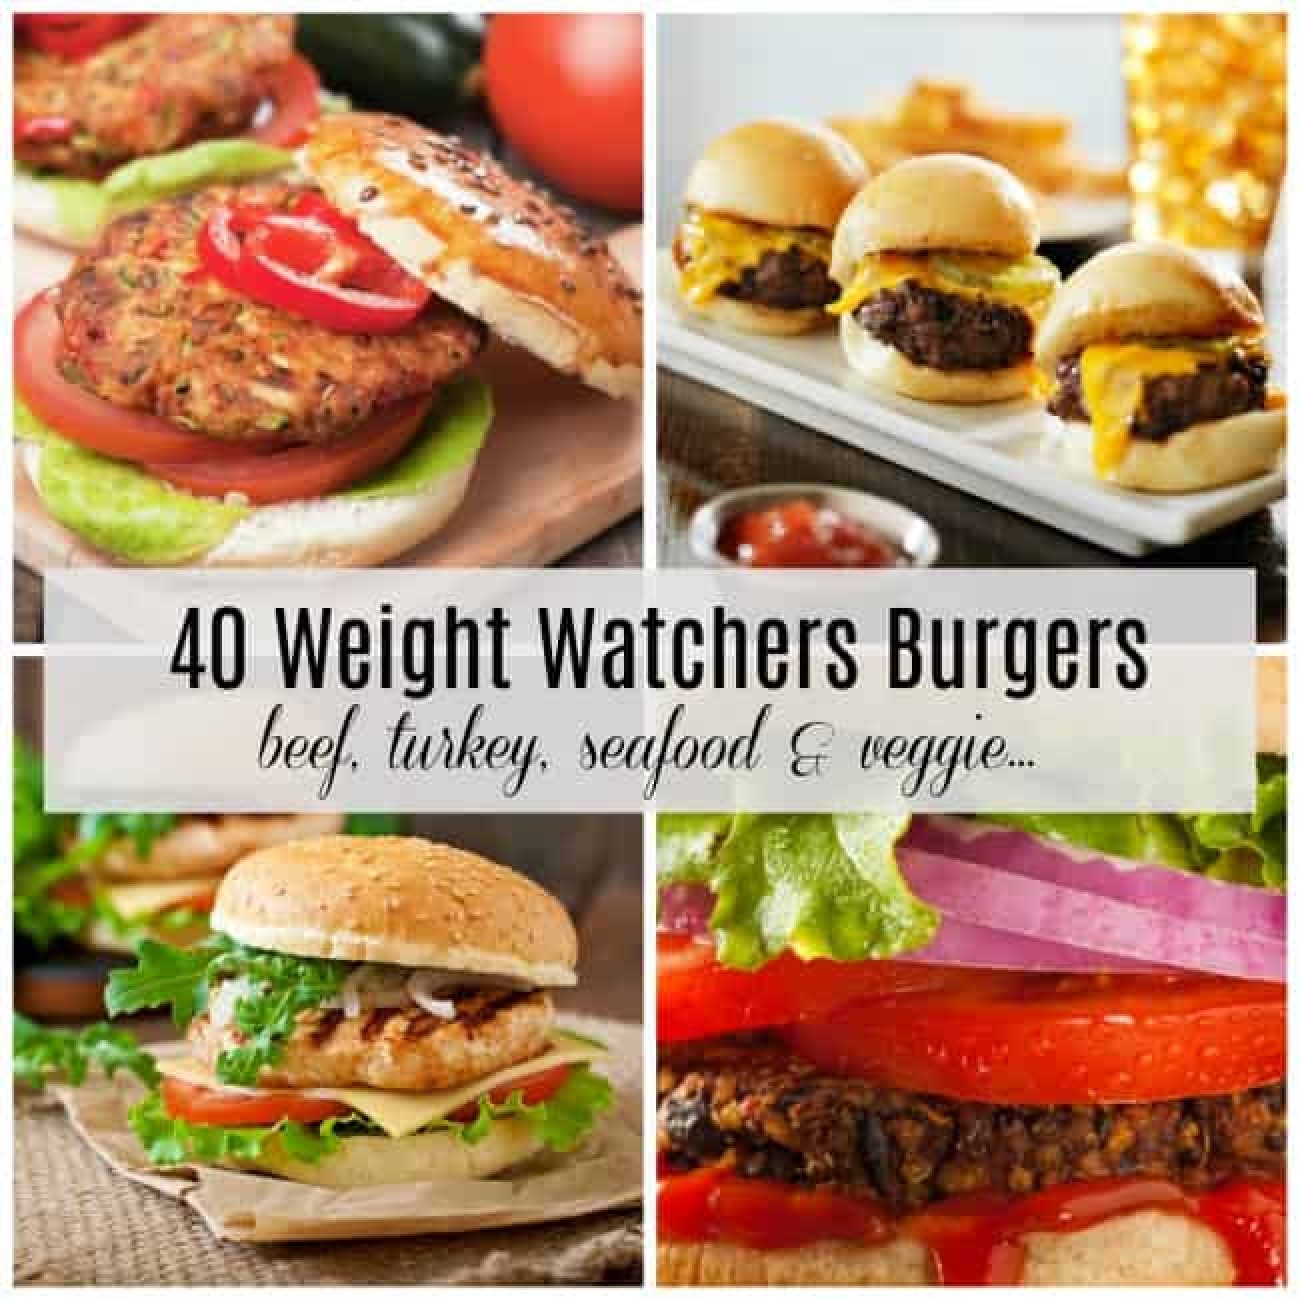 7-Point Weight Watchers Turkey and Cheddar Burgers Recipe